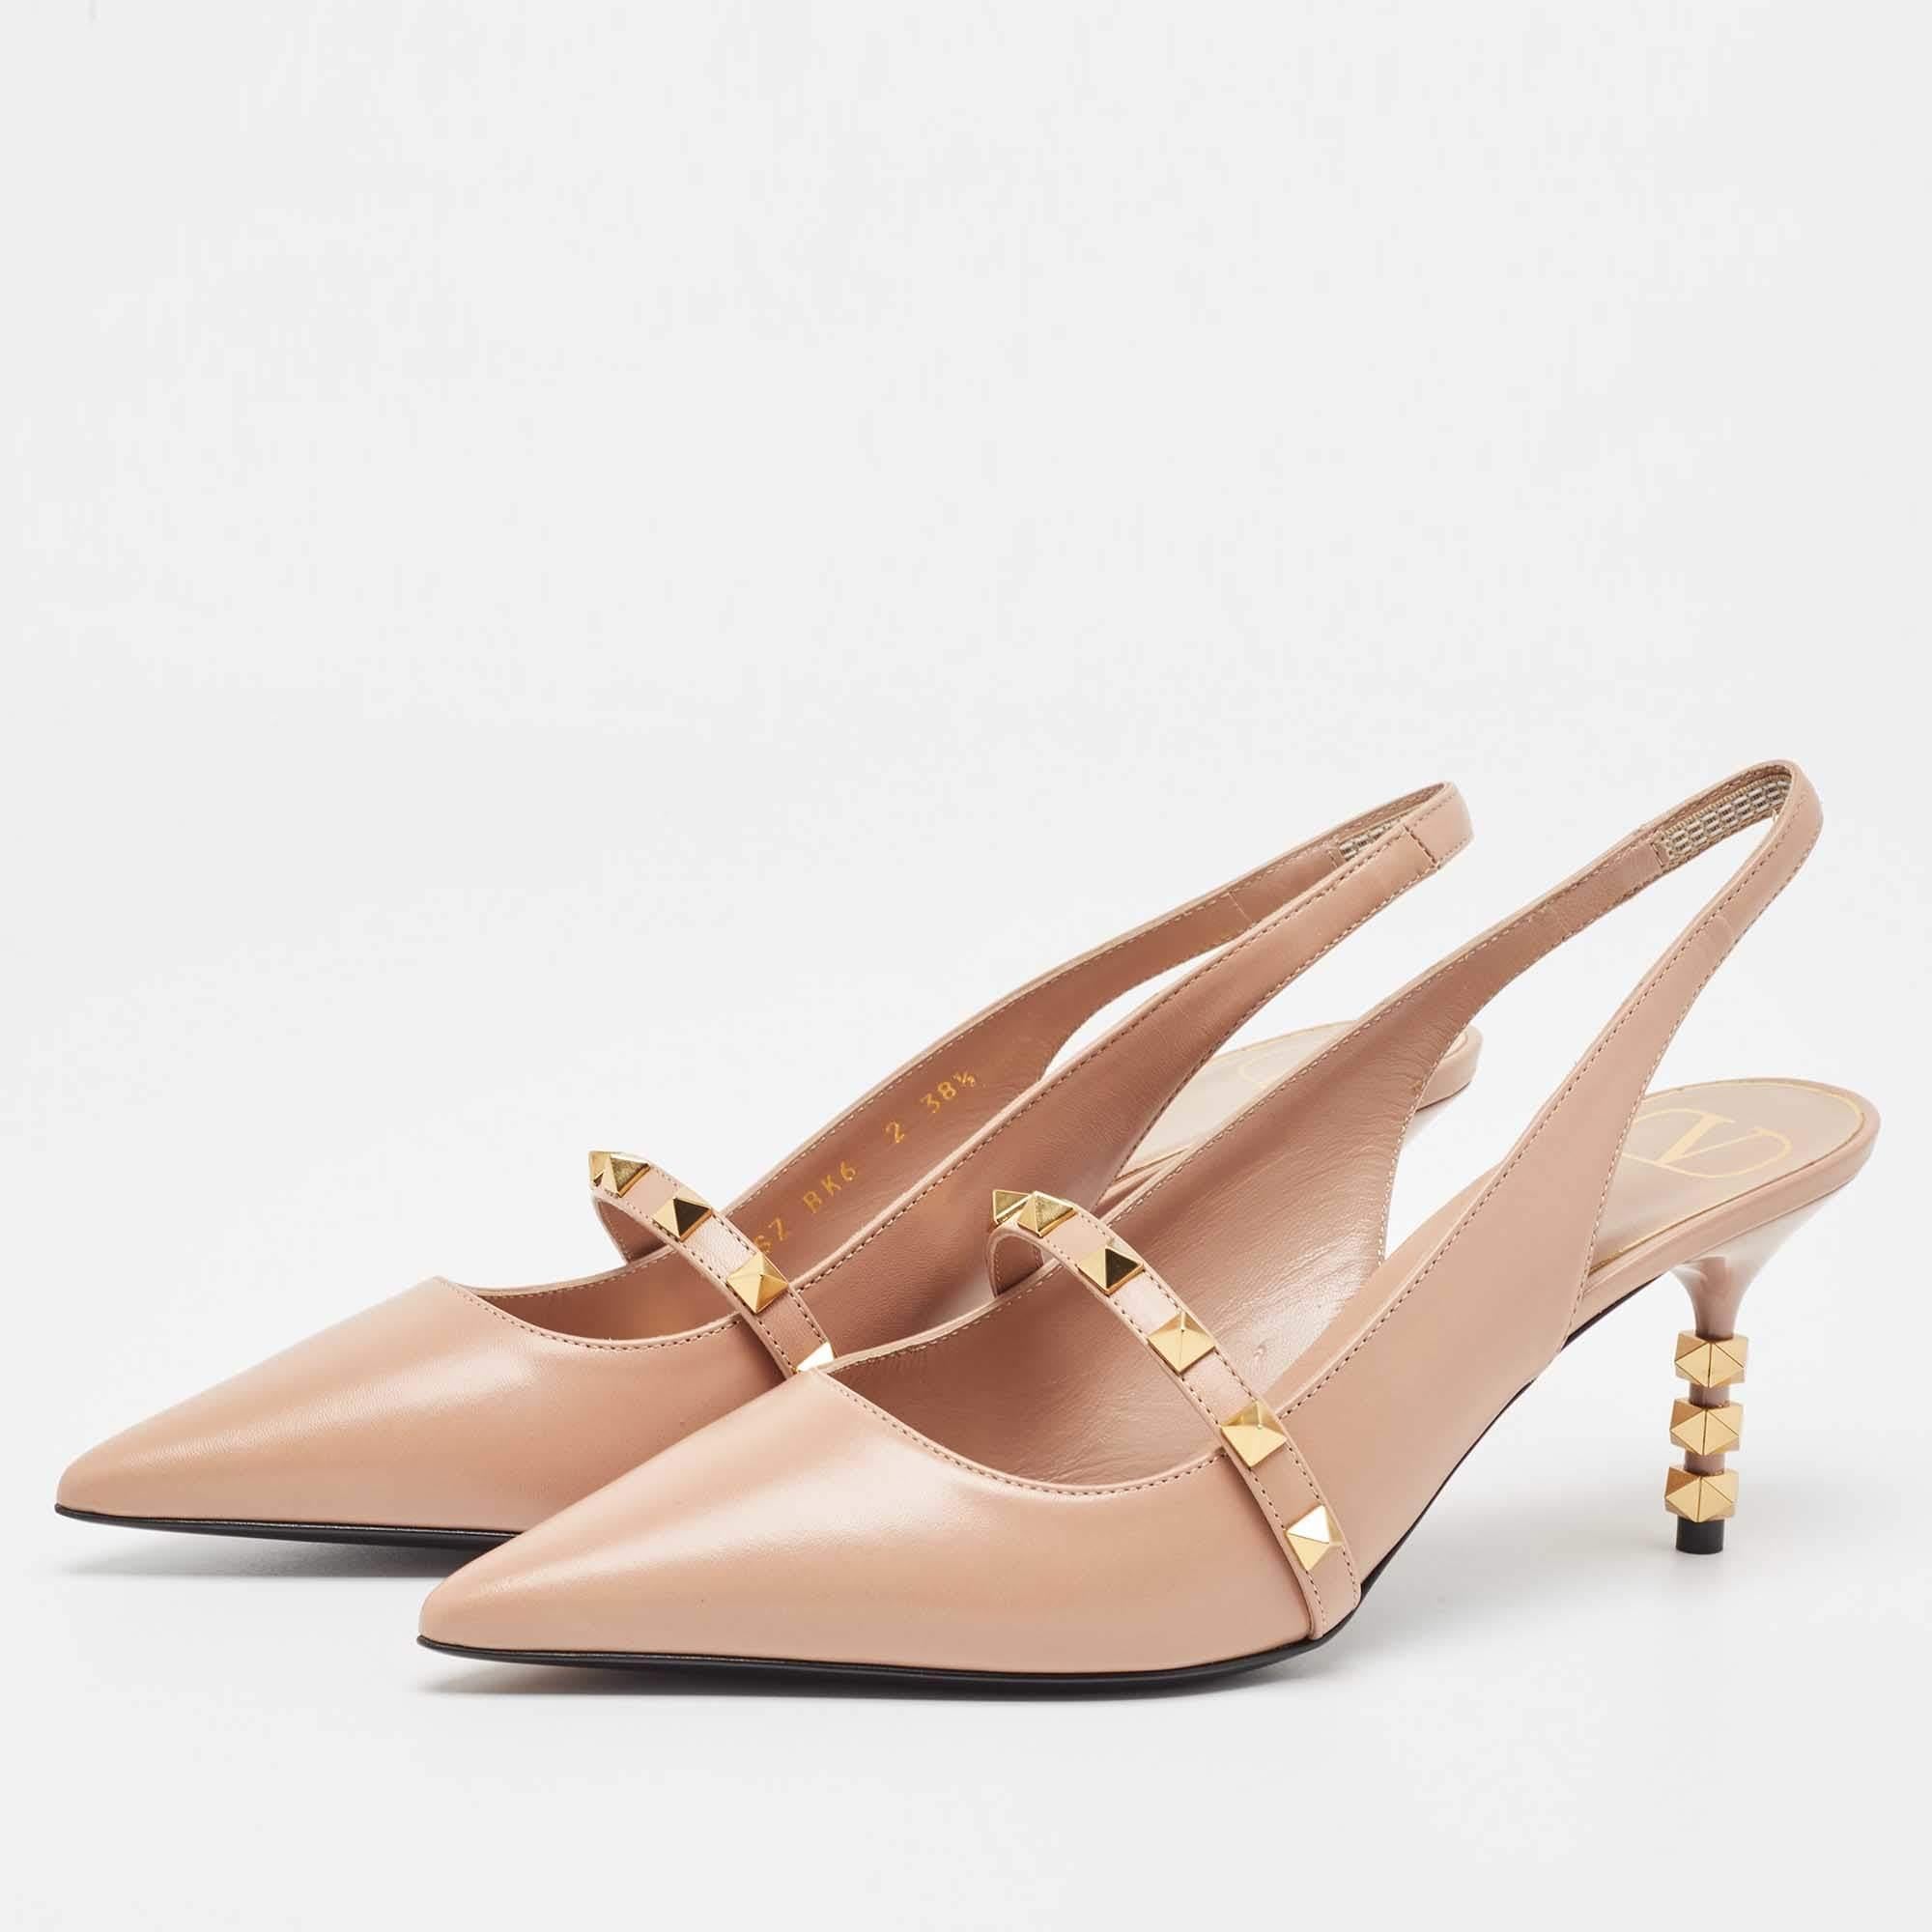 Exhibit an elegant style with this pair of Valentino beige pumps. These elegant shoes are crafted from quality materials. They are set on durable soles and sleek heels.

